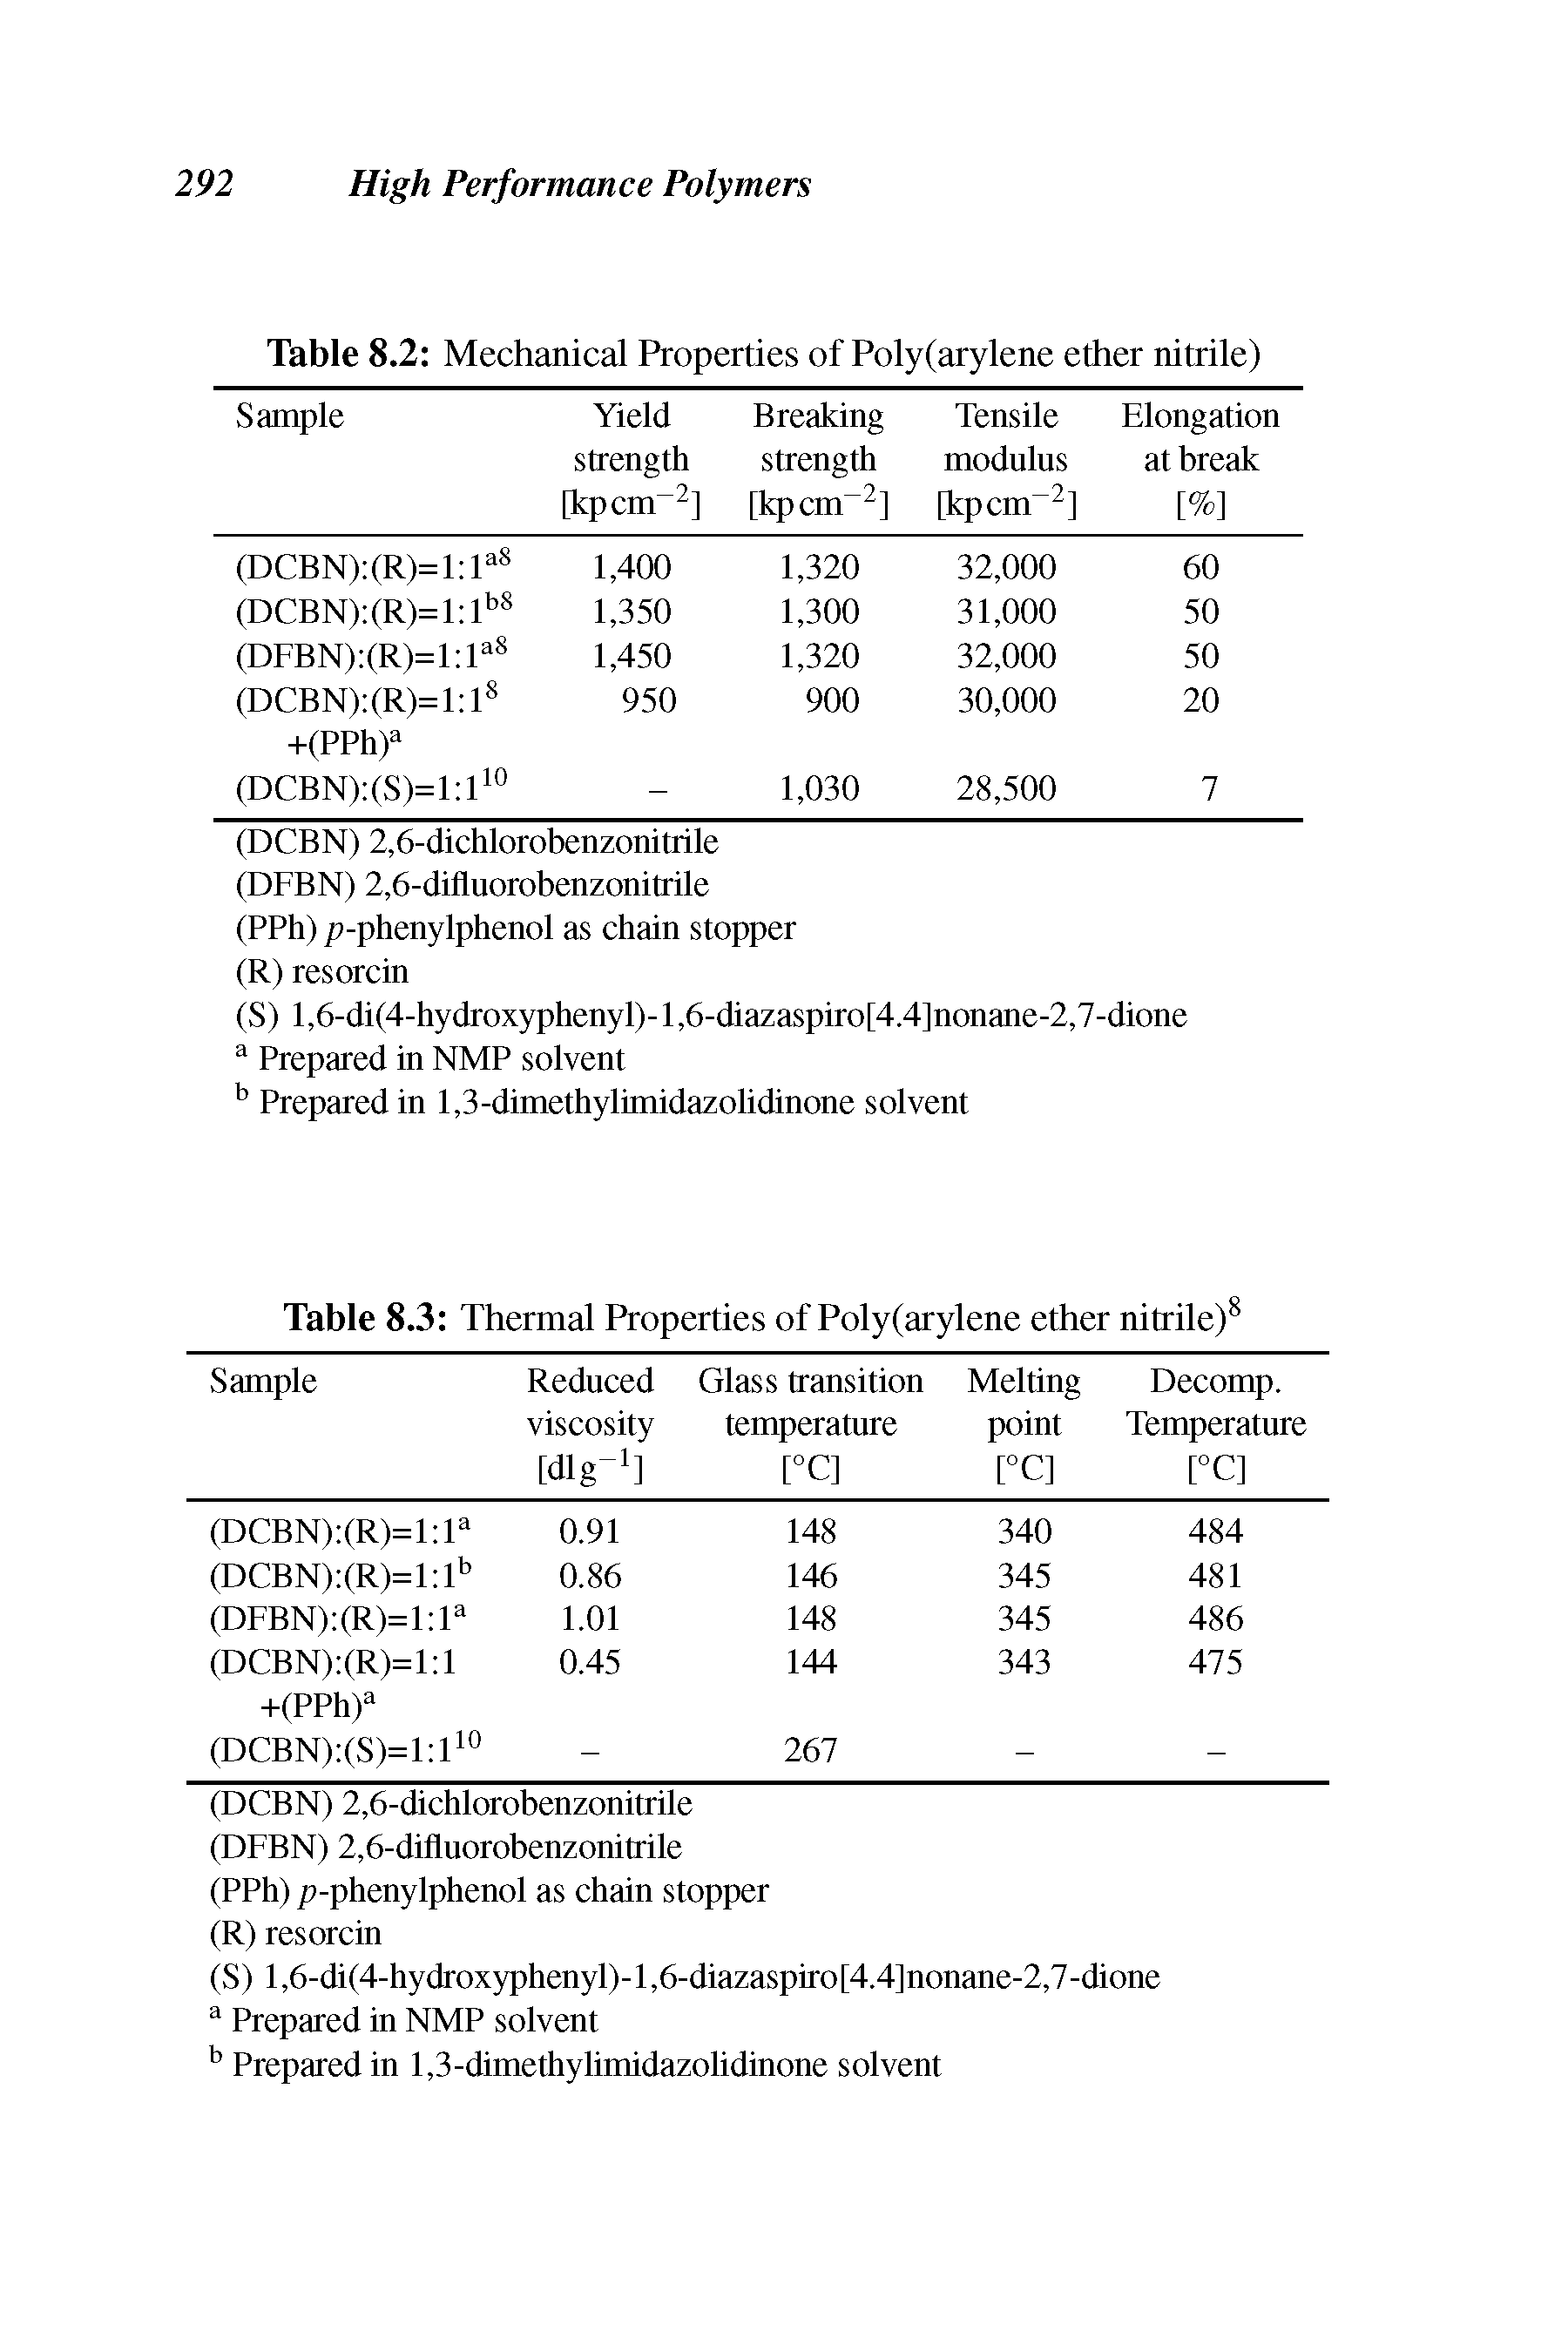 Table 8.2 Mechanical Properties of Poly(arylene ether nitrile)...